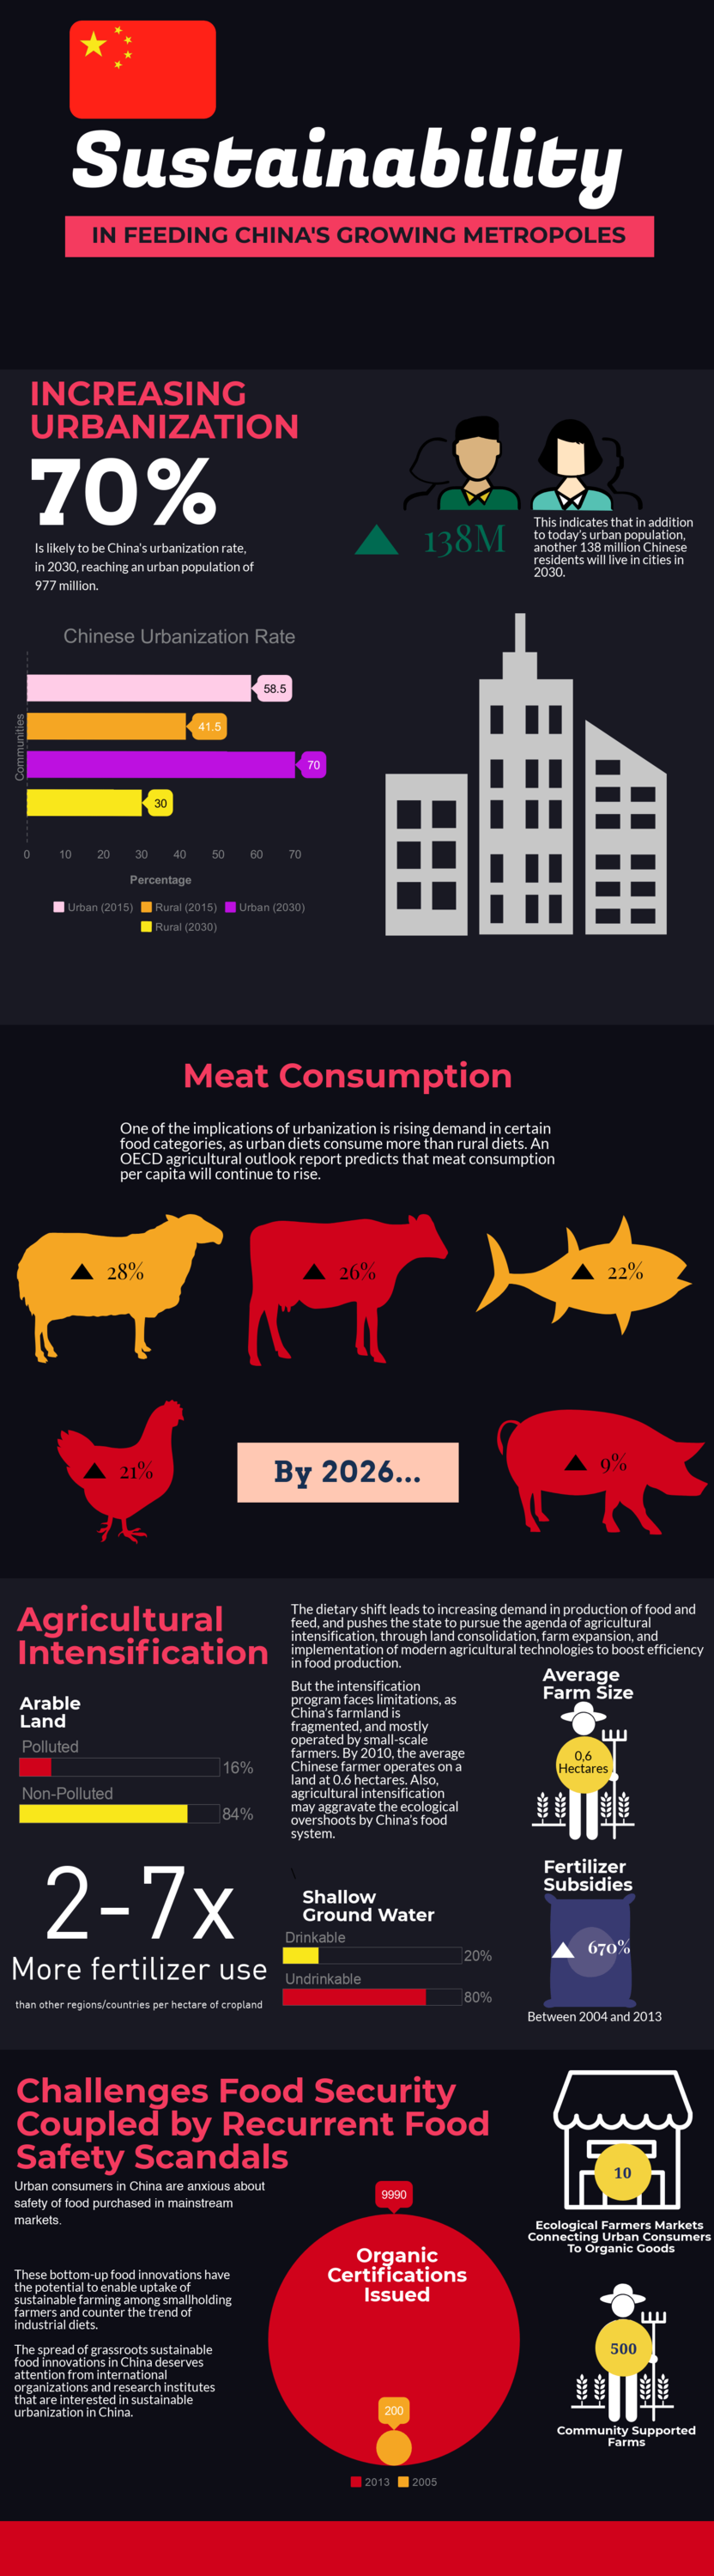 Infographic of sustainability in feeding China's growing metropoles.